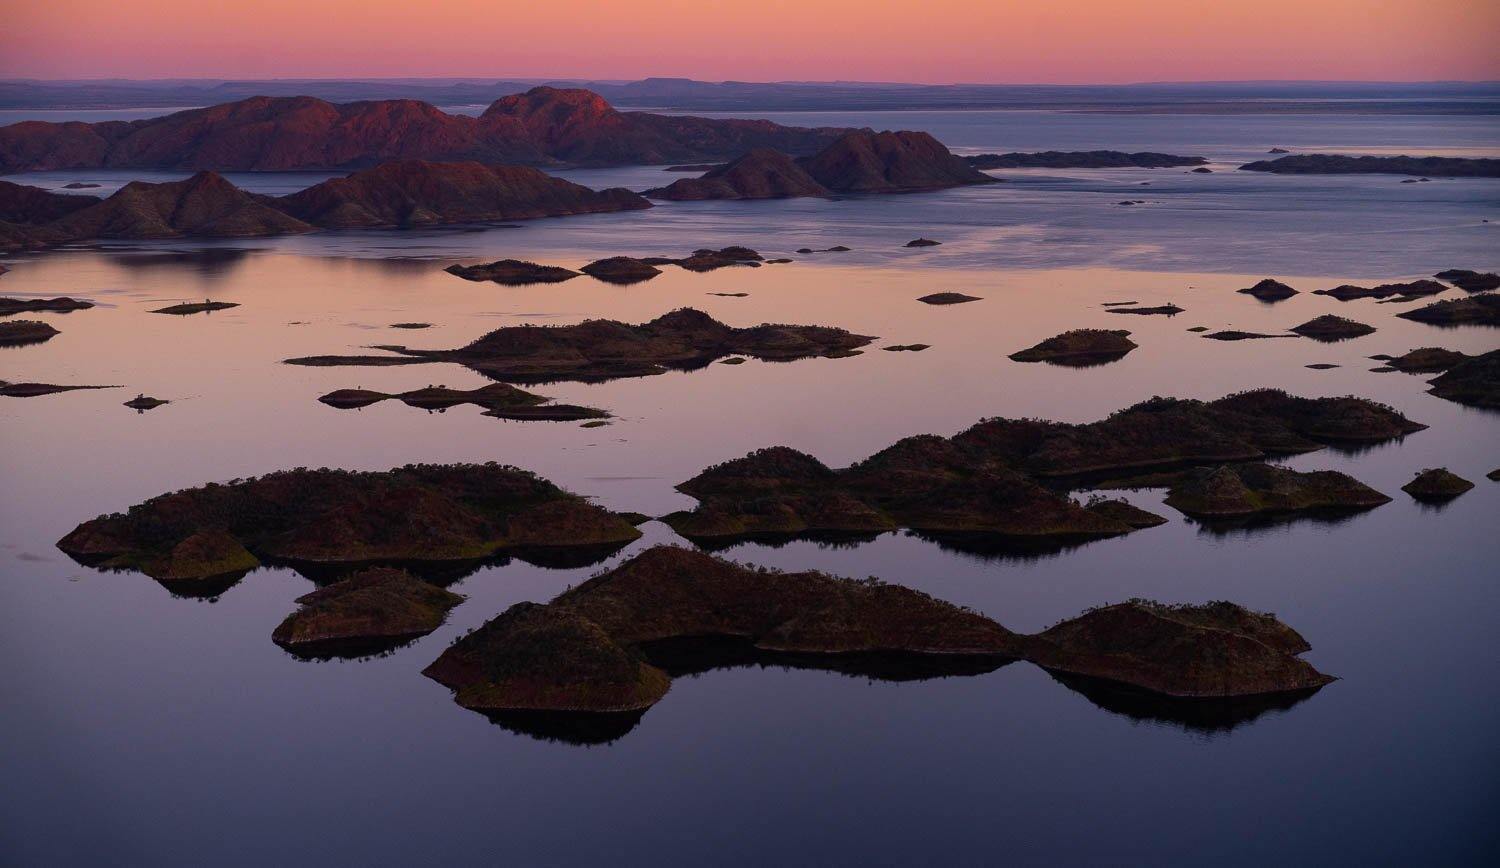 Many mounds of sand in the ocean, with a pinkish effect of sunset, Lake Argyle #14 - The Kimberley 